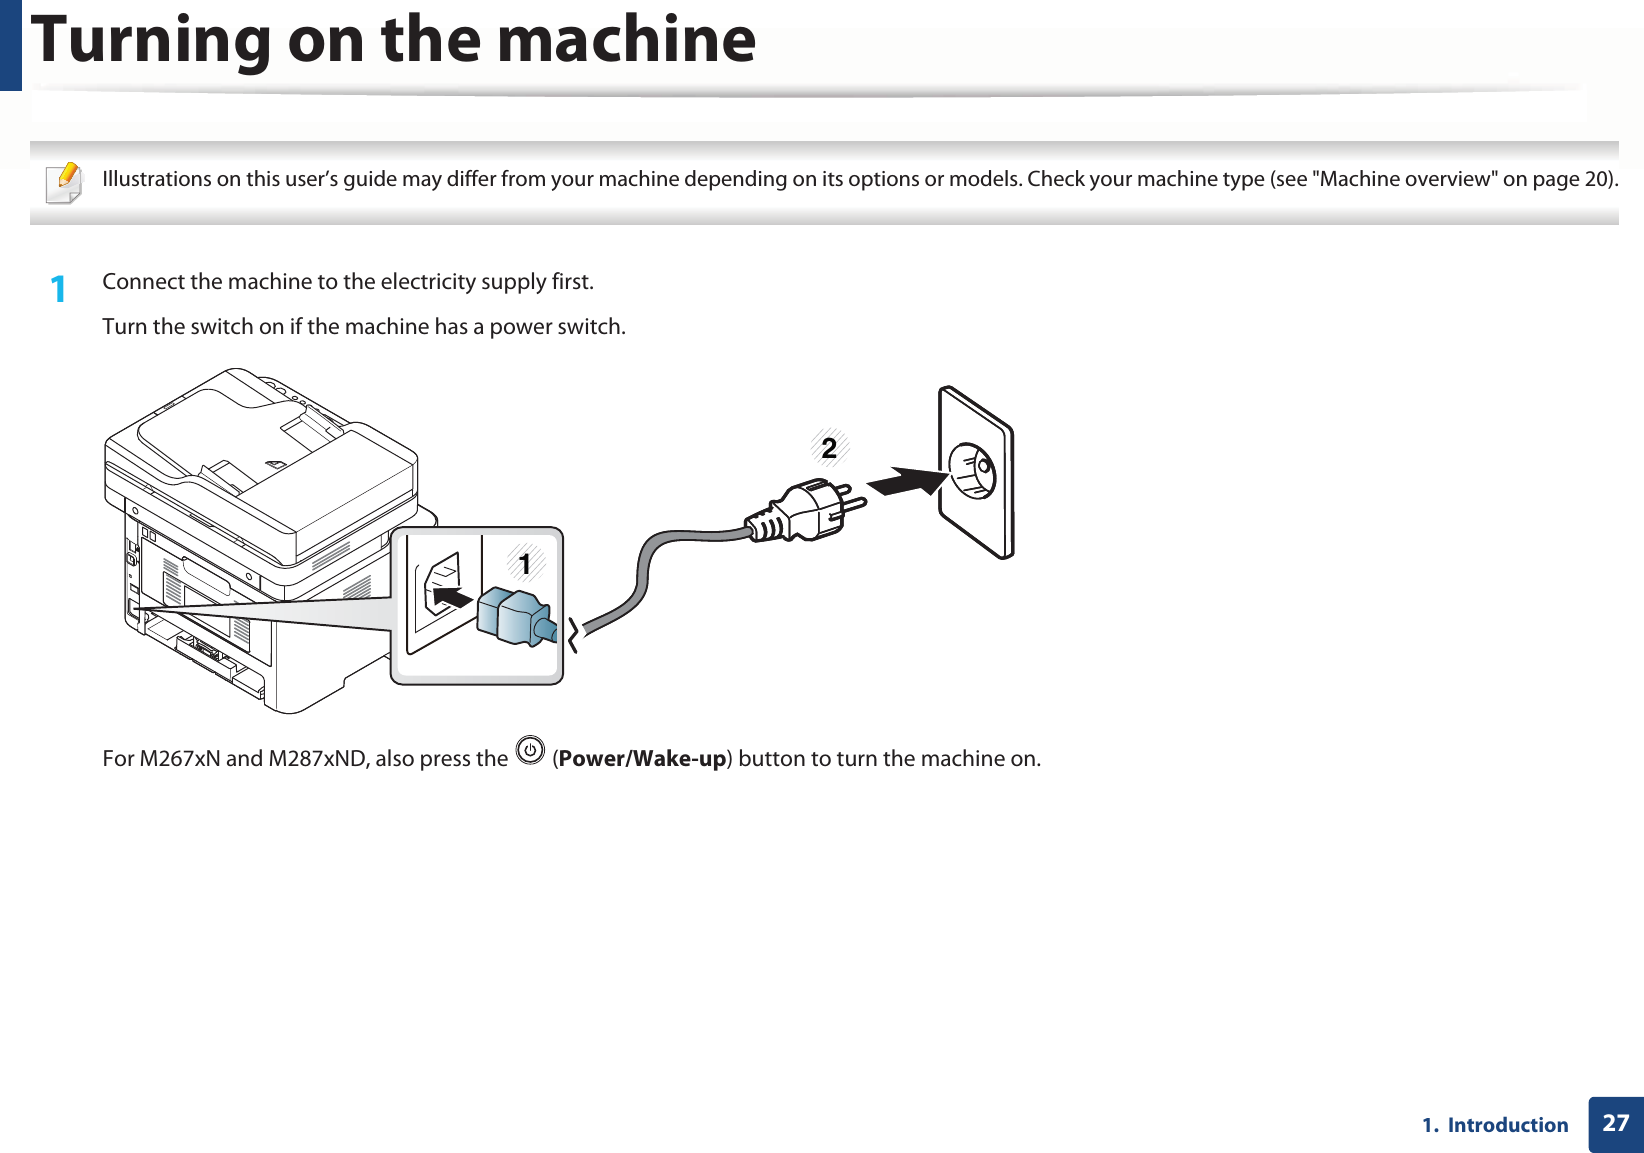 271.  IntroductionTurning on the machine Illustrations on this user’s guide may differ from your machine depending on its options or models. Check your machine type (see &quot;Machine overview&quot; on page 20). 1Connect the machine to the electricity supply first.Turn the switch on if the machine has a power switch.For M267xN and M287xND, also press the   (Power/Wake-up) button to turn the machine on.12